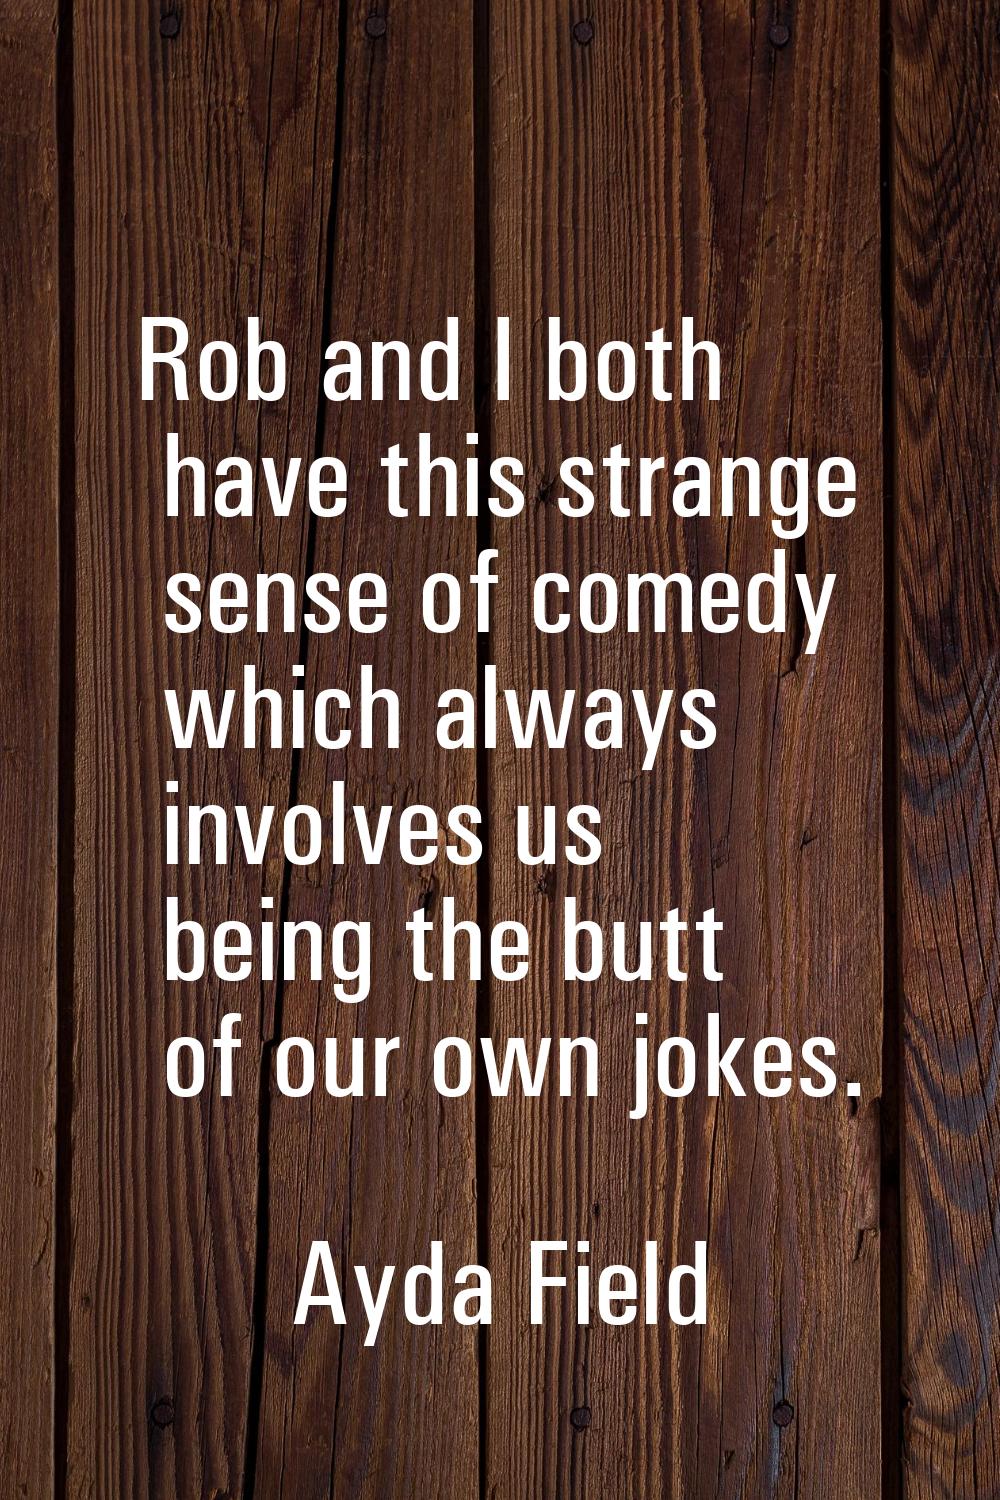 Rob and I both have this strange sense of comedy which always involves us being the butt of our own